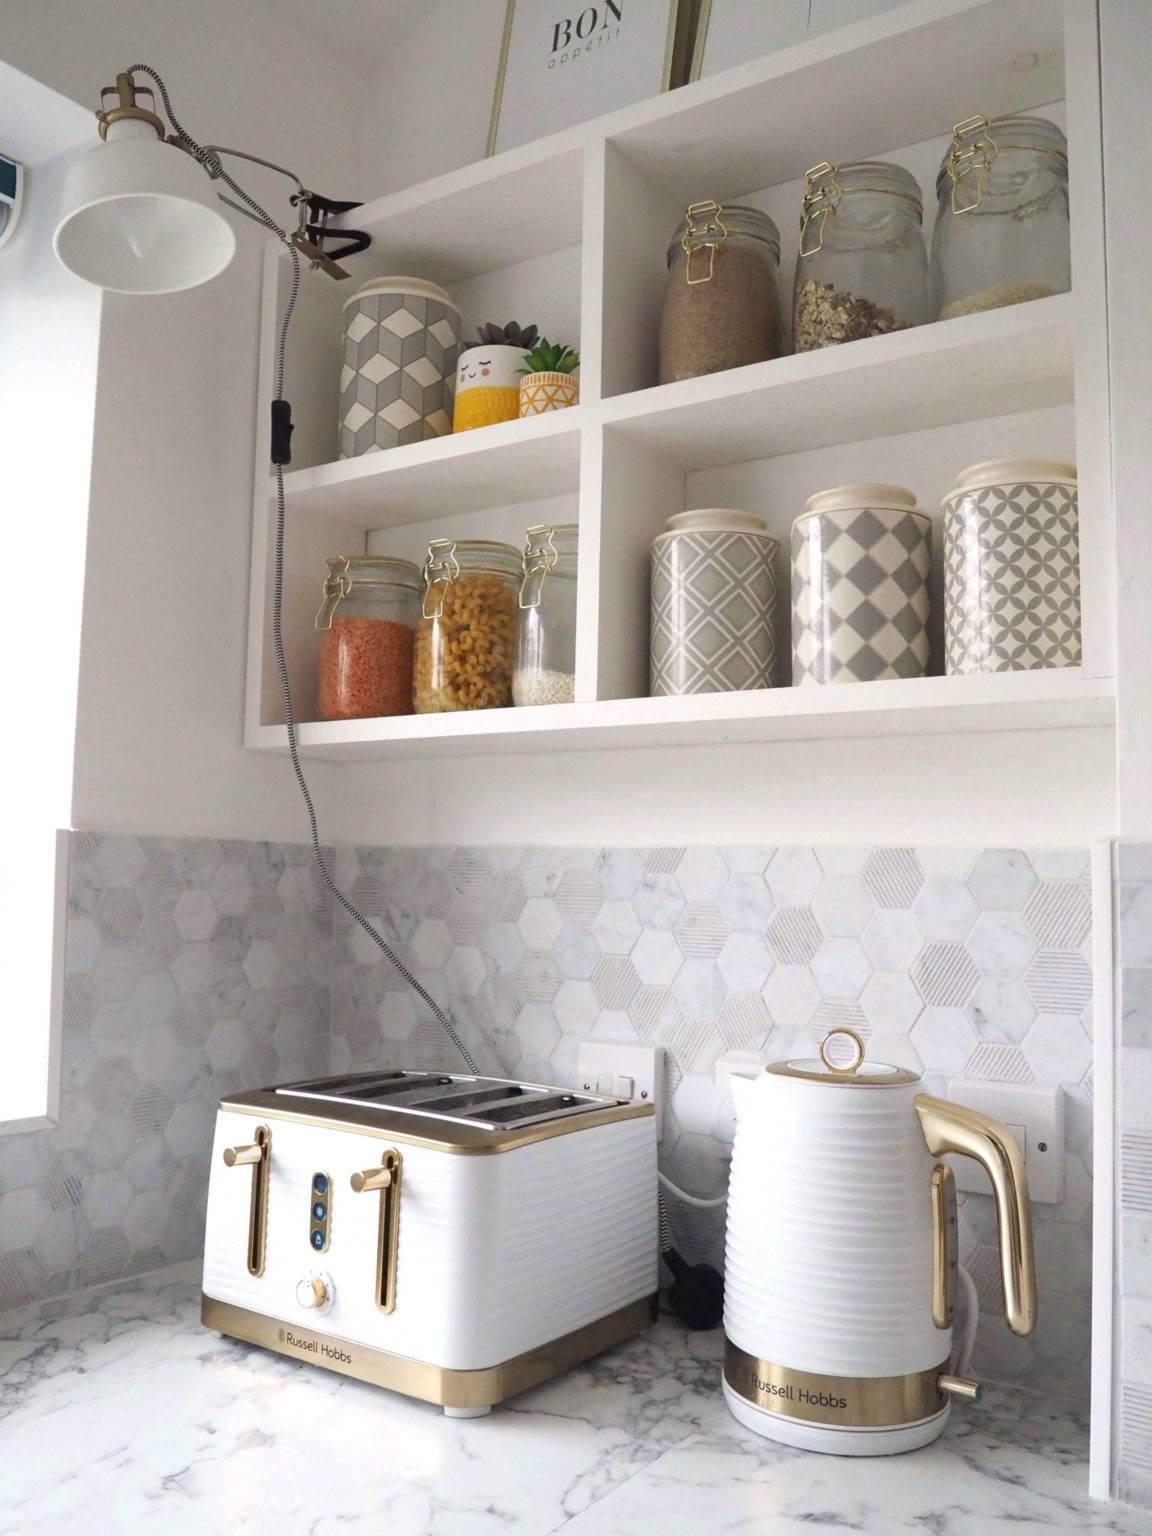 Don't Miss This Amazing Kitchen Makeover - With Before & Afters